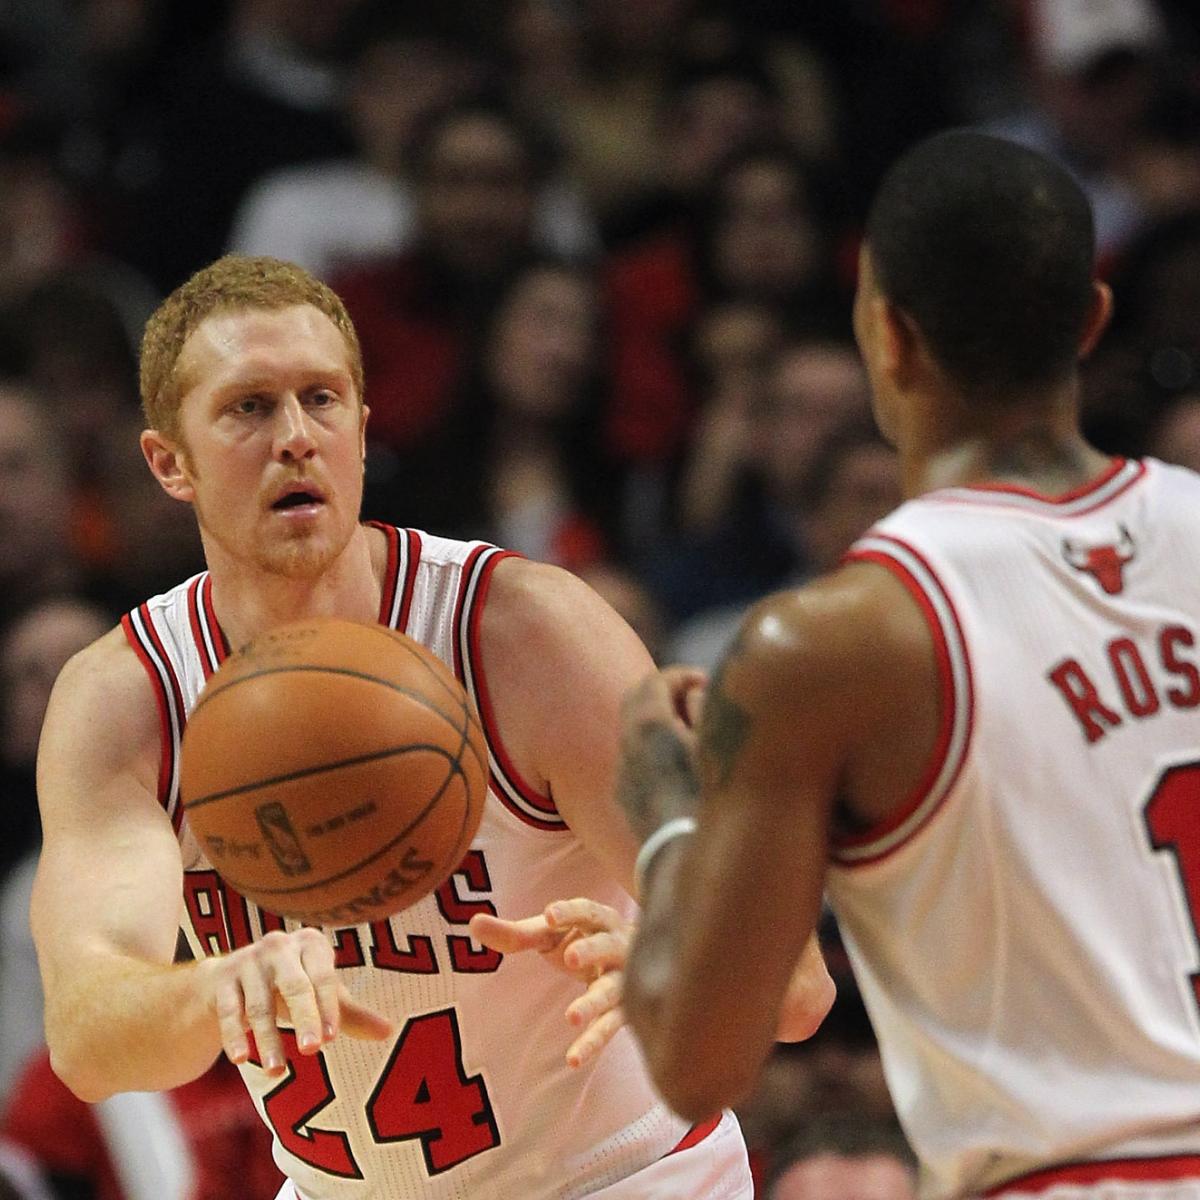 BIT OF HISTORY: The Brian Scalabrine Game 16 years later - NetsDaily